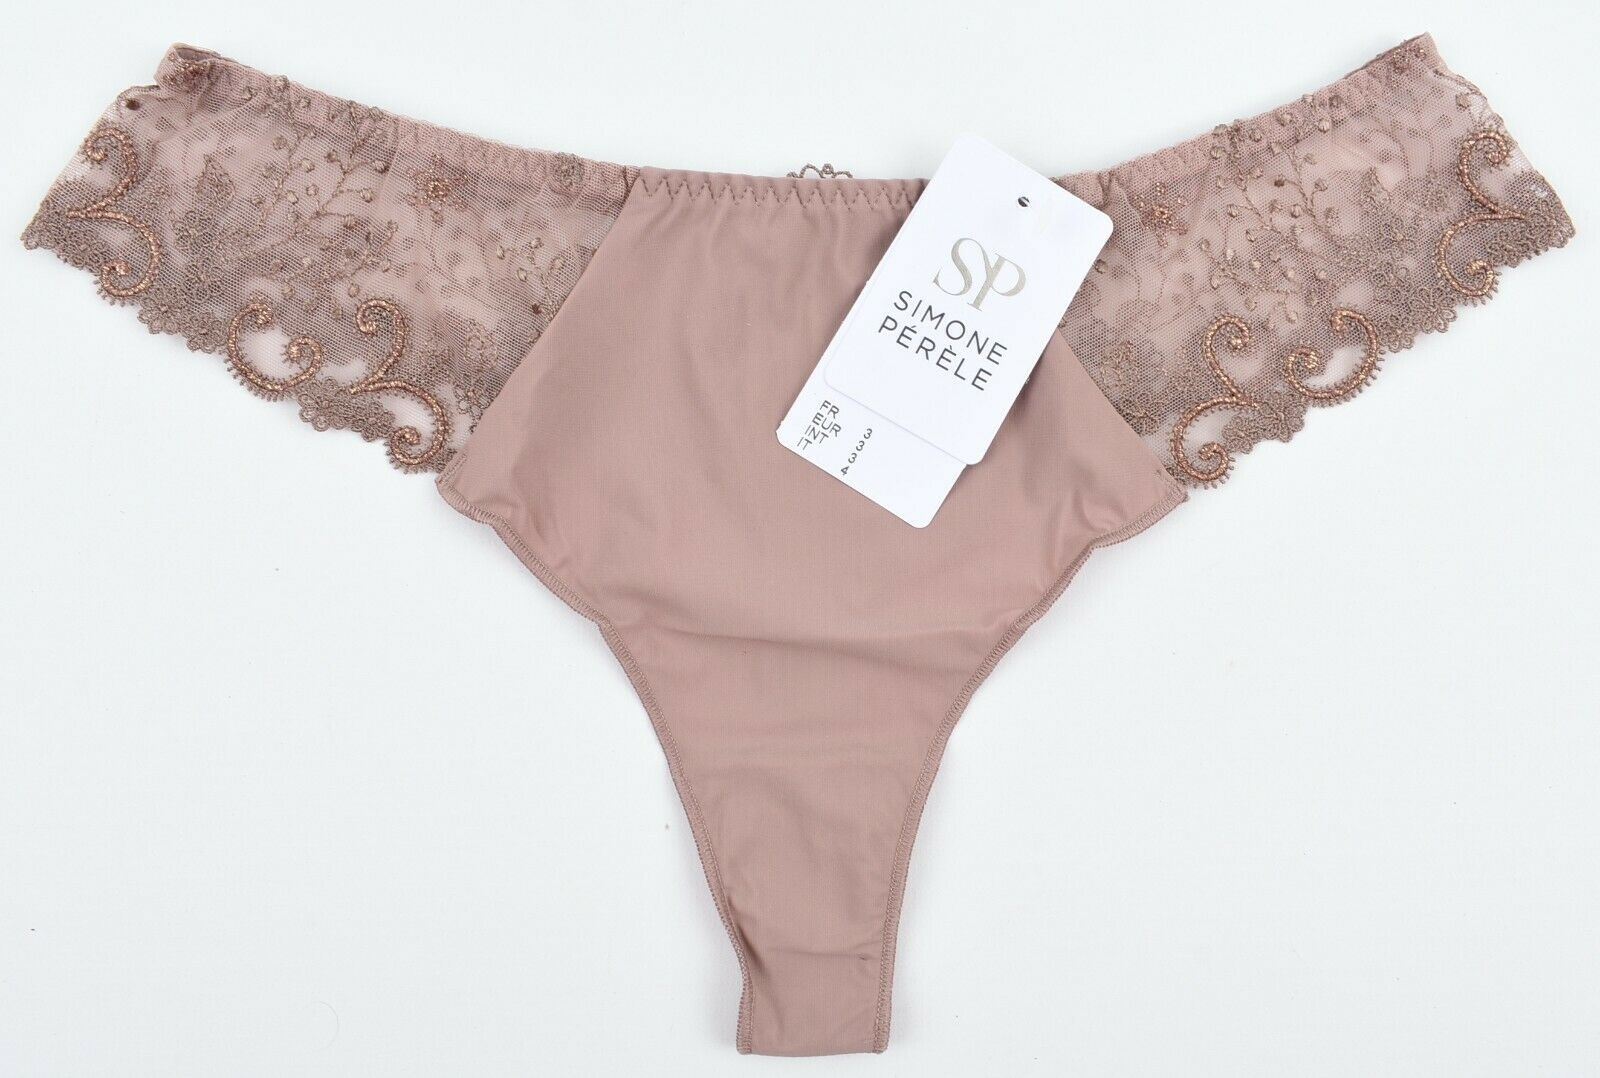 SIMONE PERELE Women's Lace Detail THONGS Knickers Taupe Brown, size M